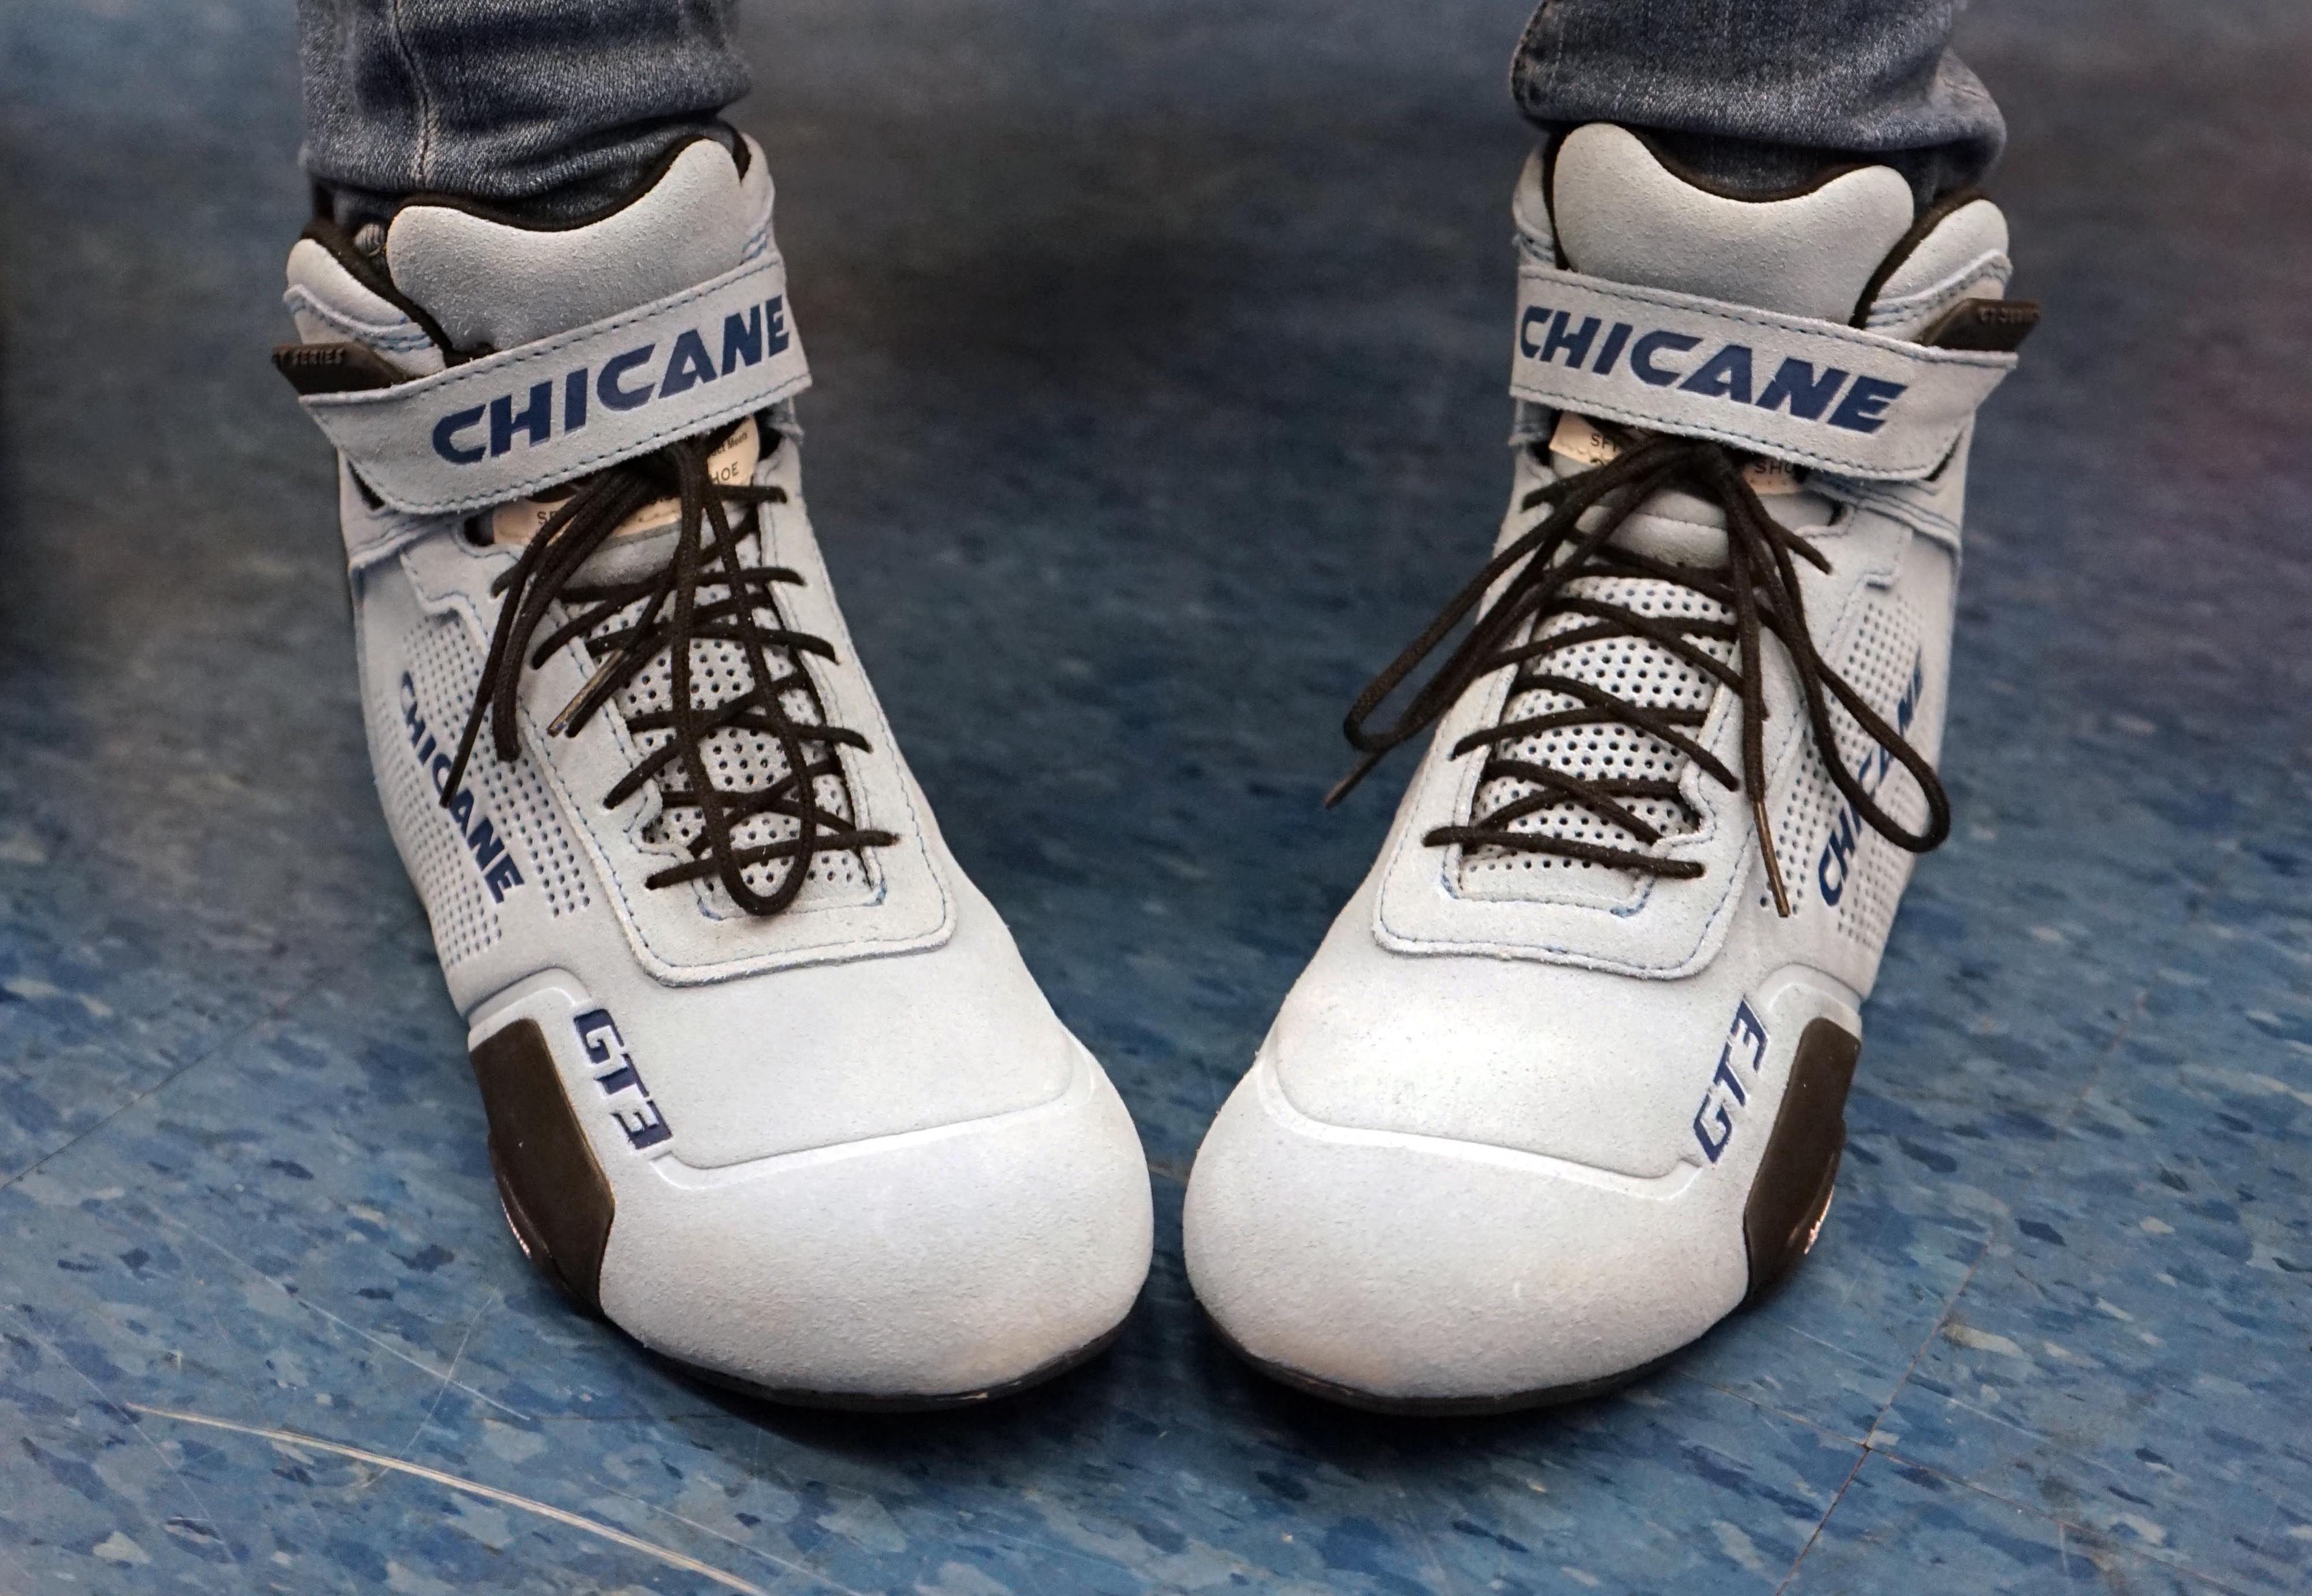 Chicane the sole of racing, racing shoes, women's racing shoes, gender-specific safety gear, race wear, racing shoes, trackday shoes, driving shoes 